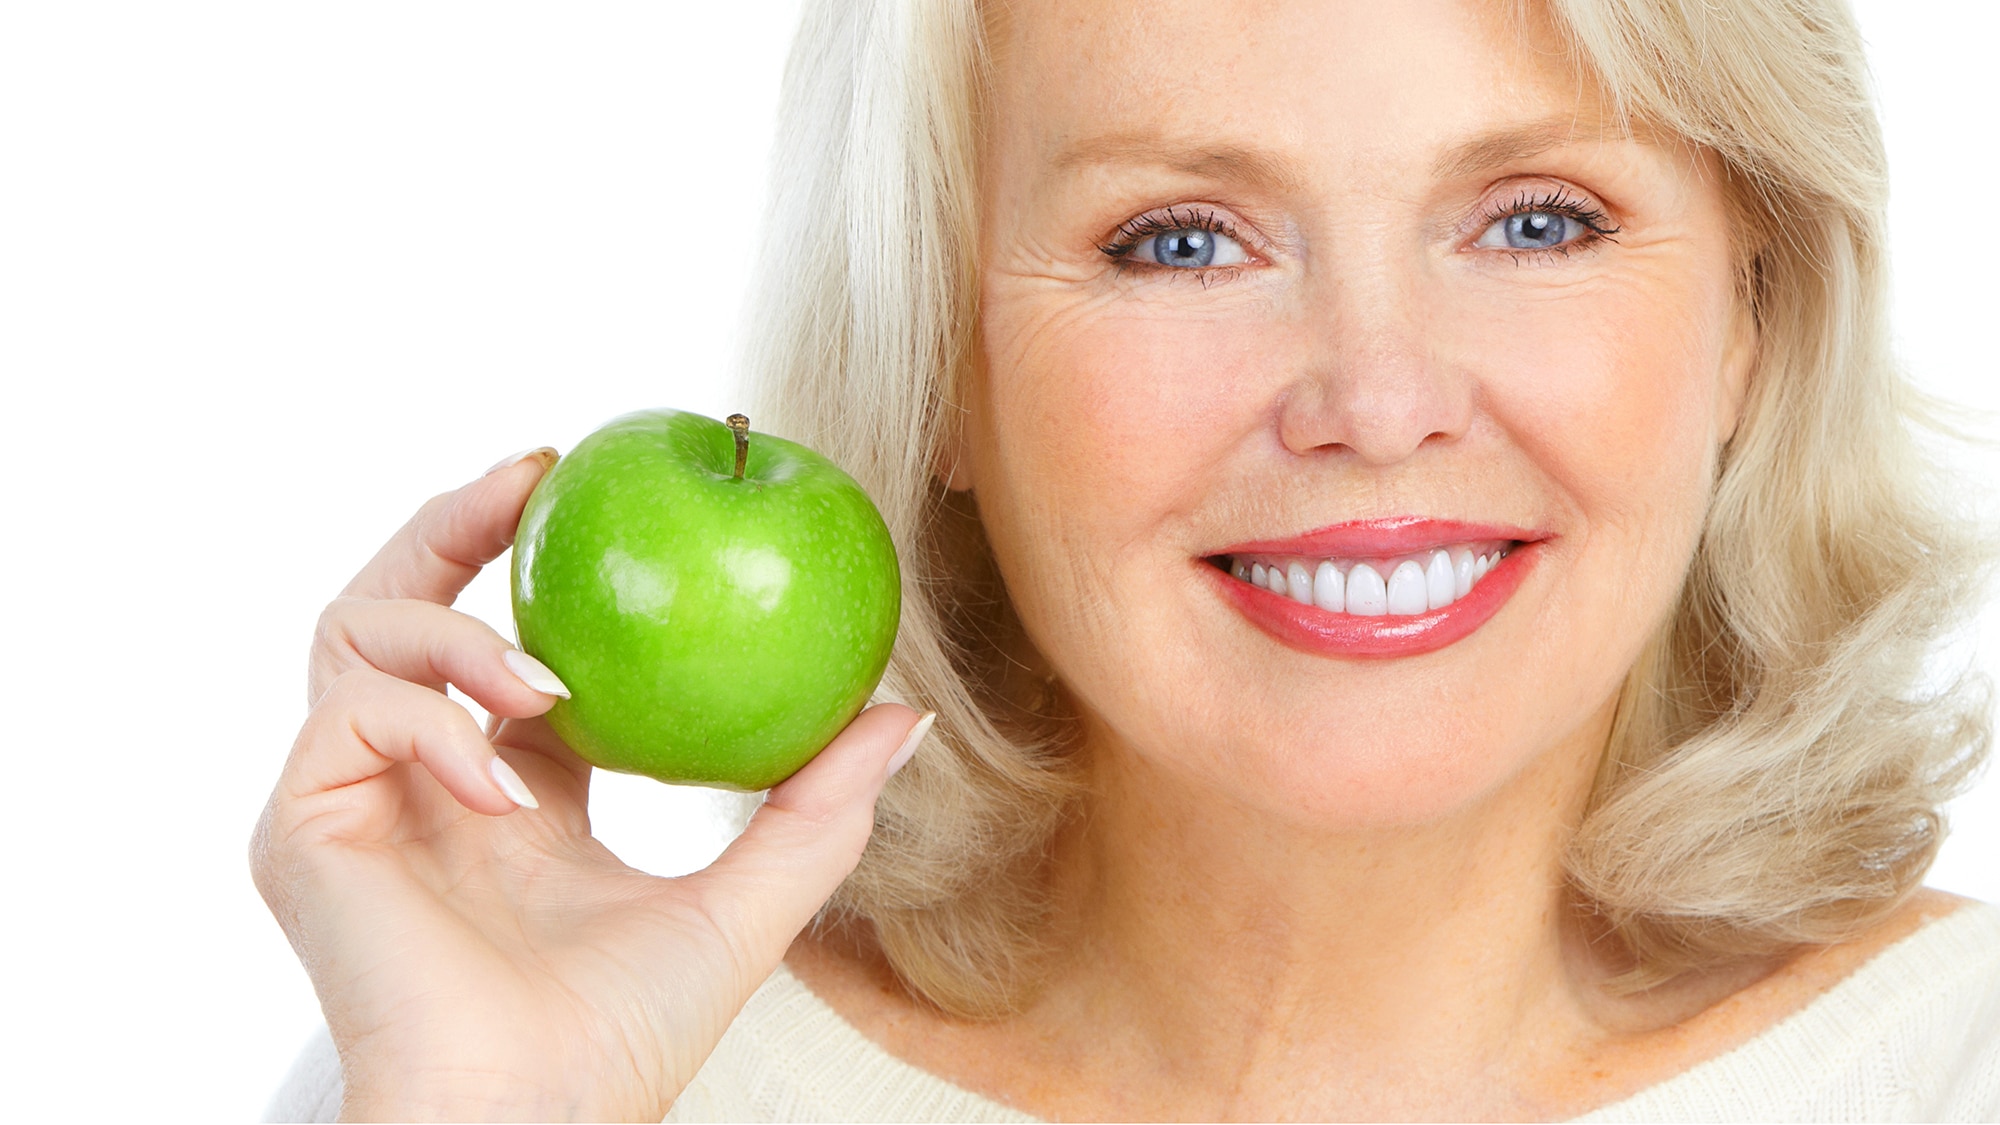 Elderly woman holding a ripe green apple. Are your cataracts ripe?